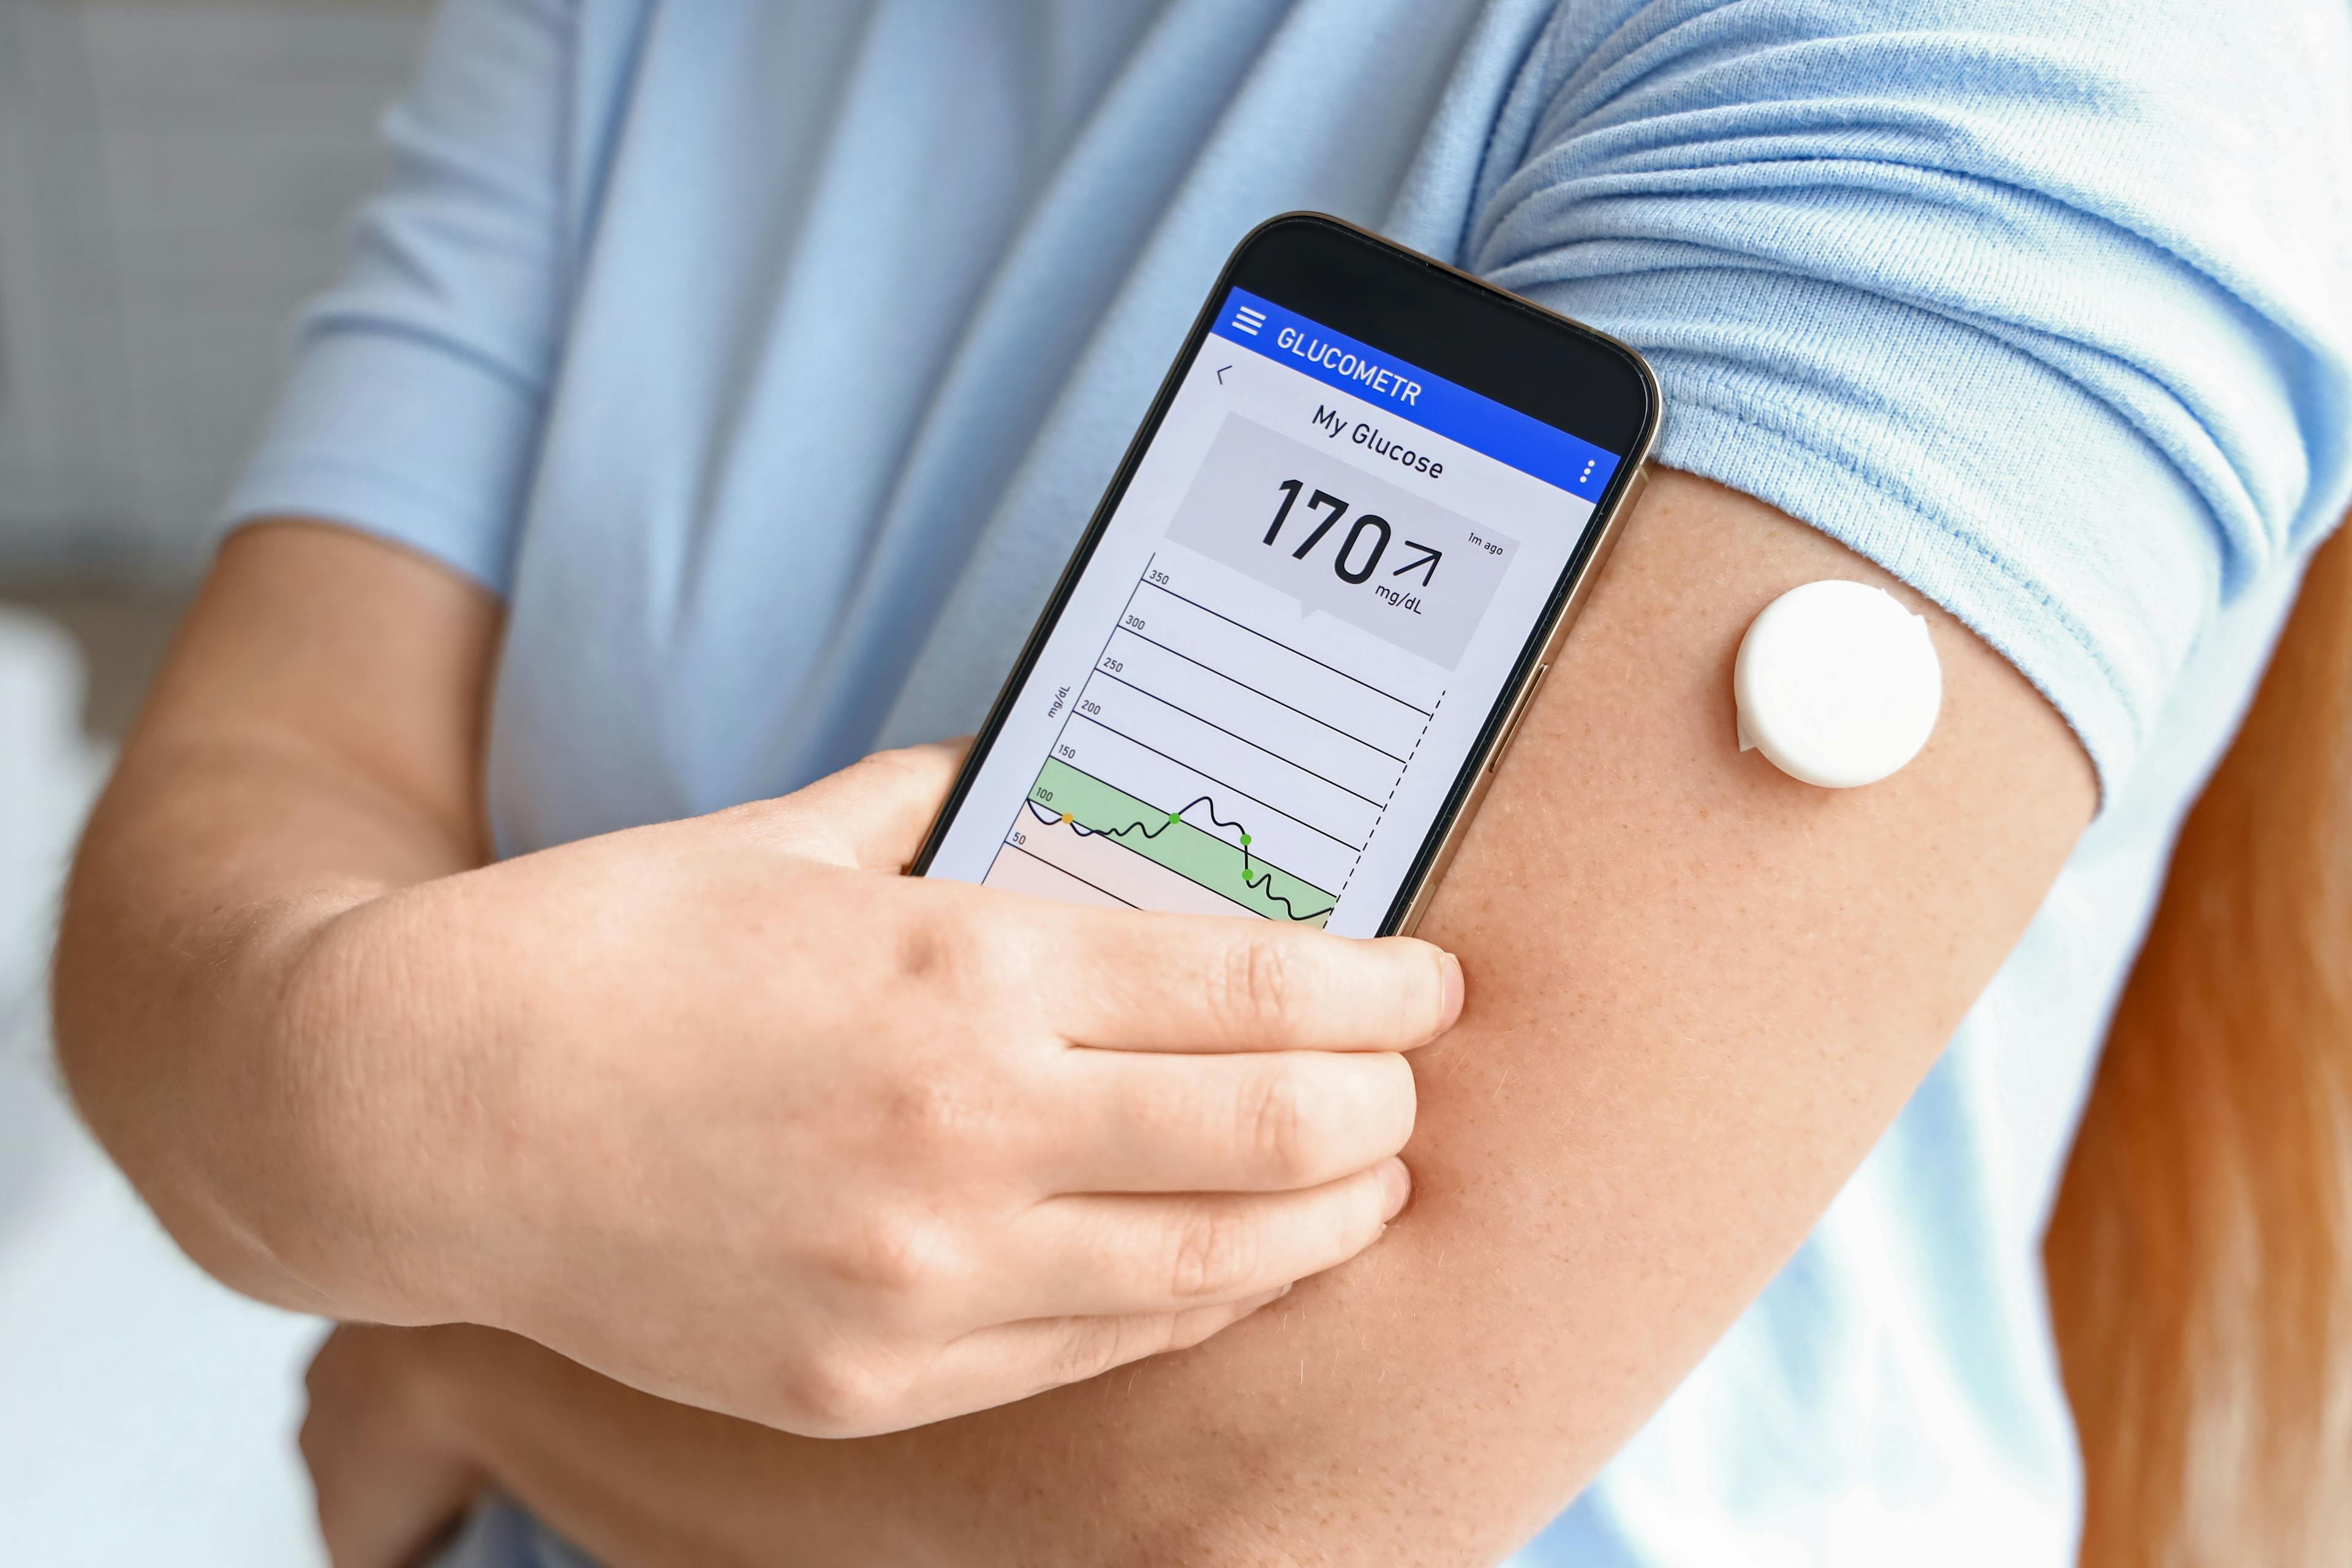 Continuous Glucose Monitors Help Reduce A1c in Patients with Diabetes / Pixel-Shot - stock.adobe.com